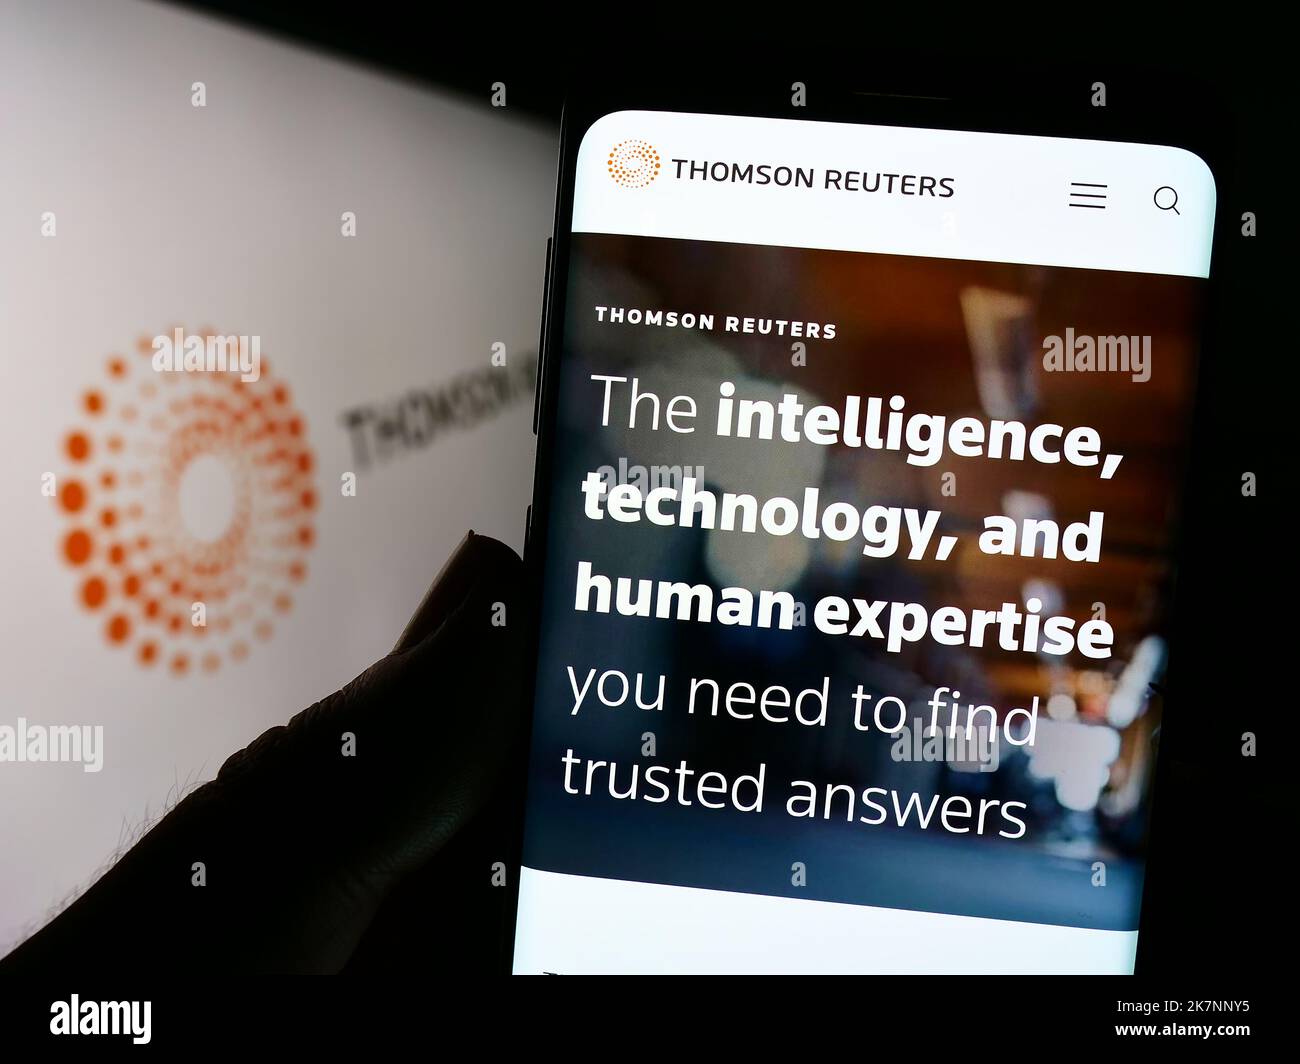 Person holding cellphone with website of media company Thomson Reuters Corporation on screen in front of logo. Focus on center of phone display. Stock Photo